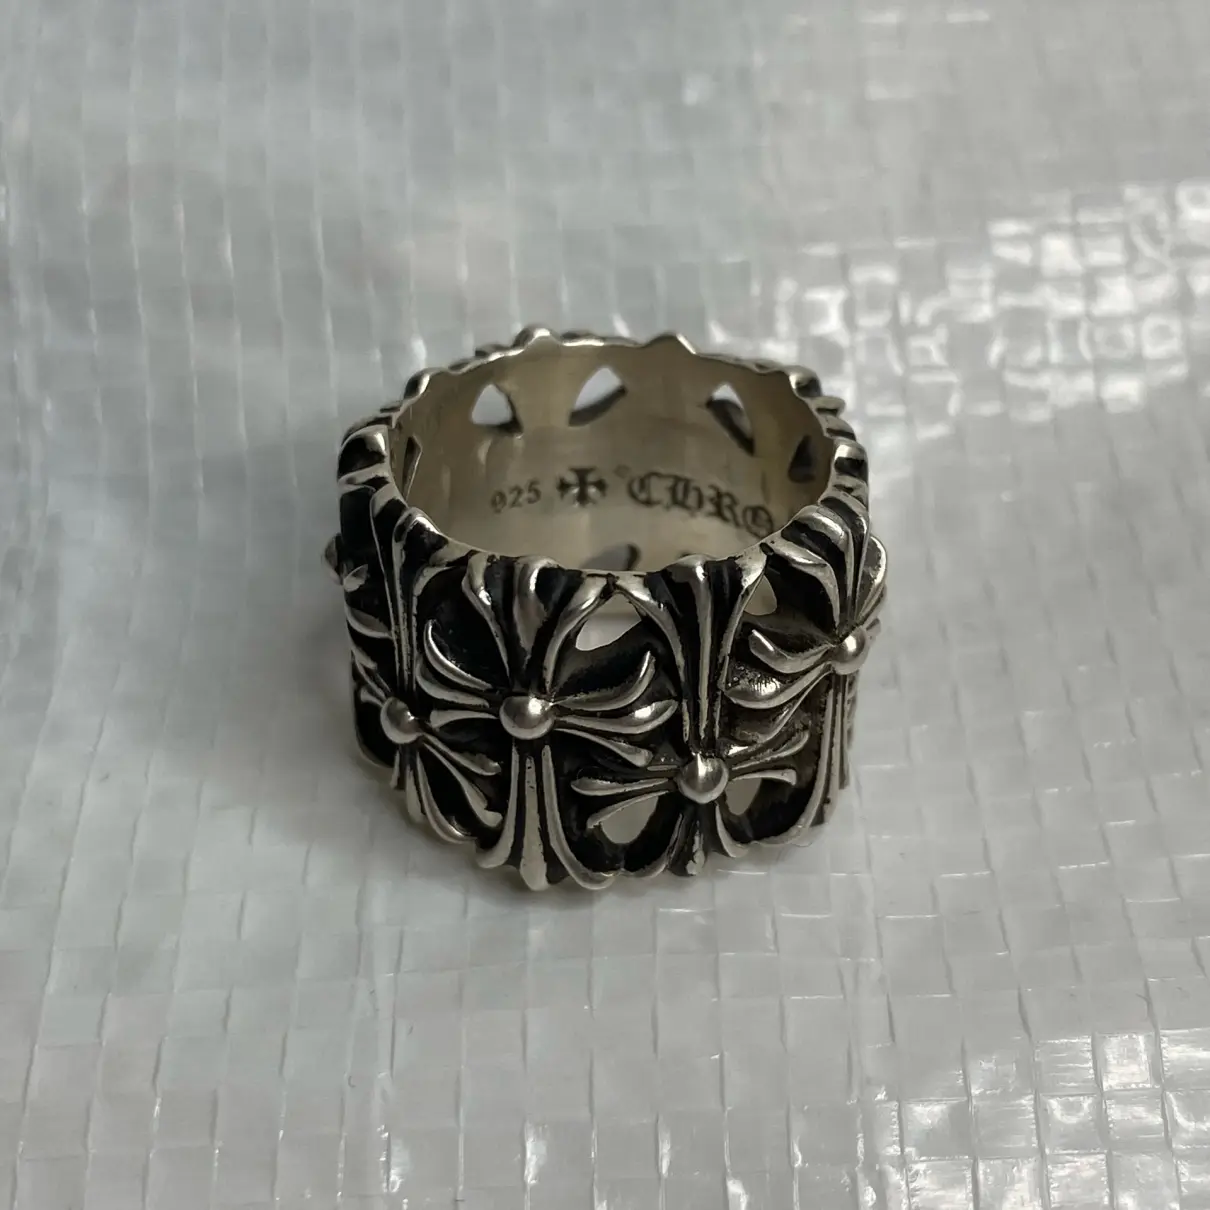 Buy Chrome Hearts Silver jewellery online